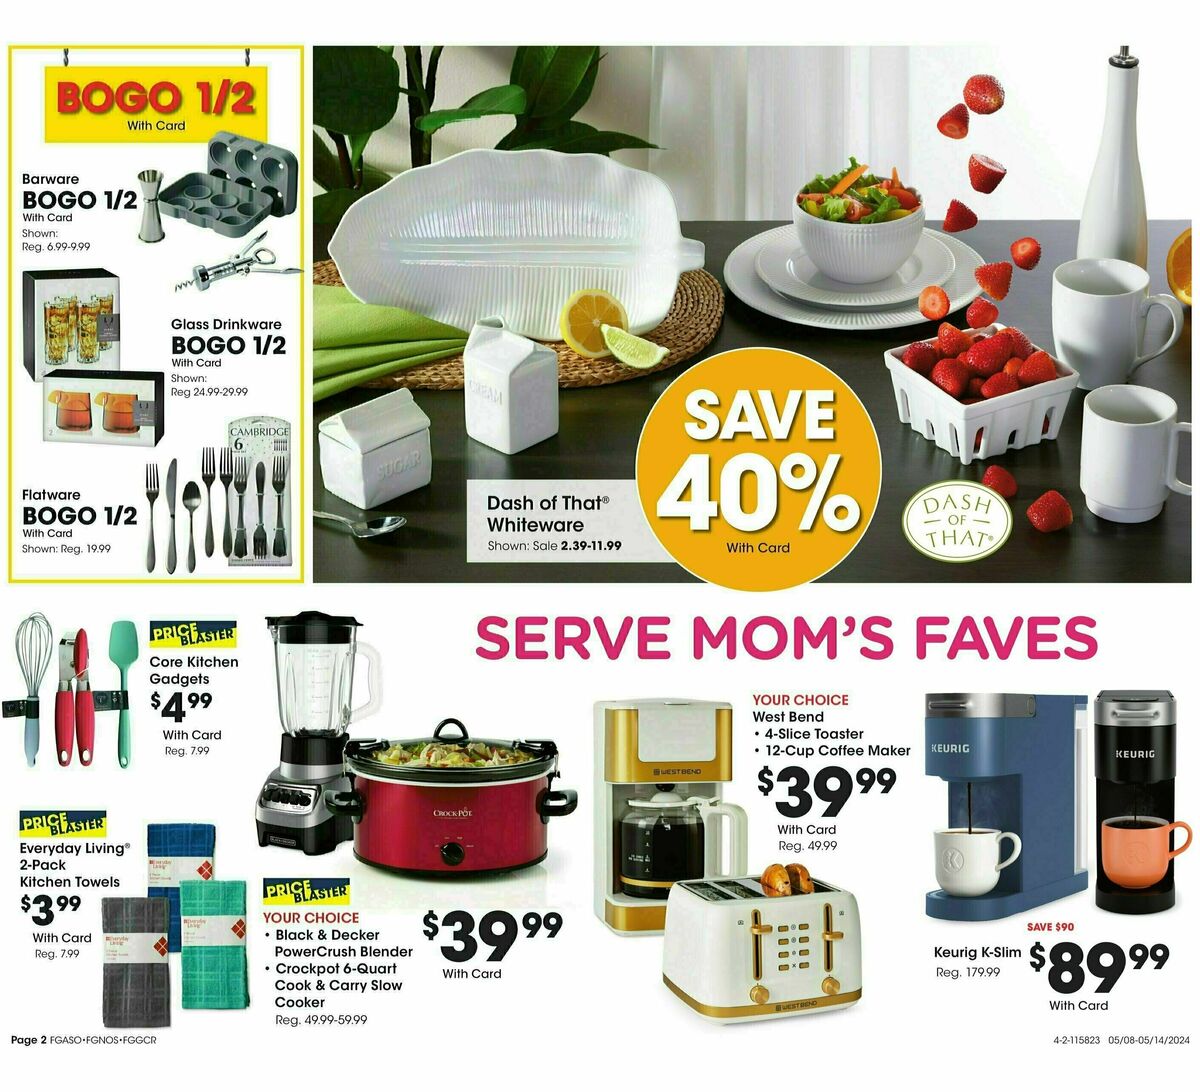 Fred Meyer Moms Day Weekly Ad from May 8